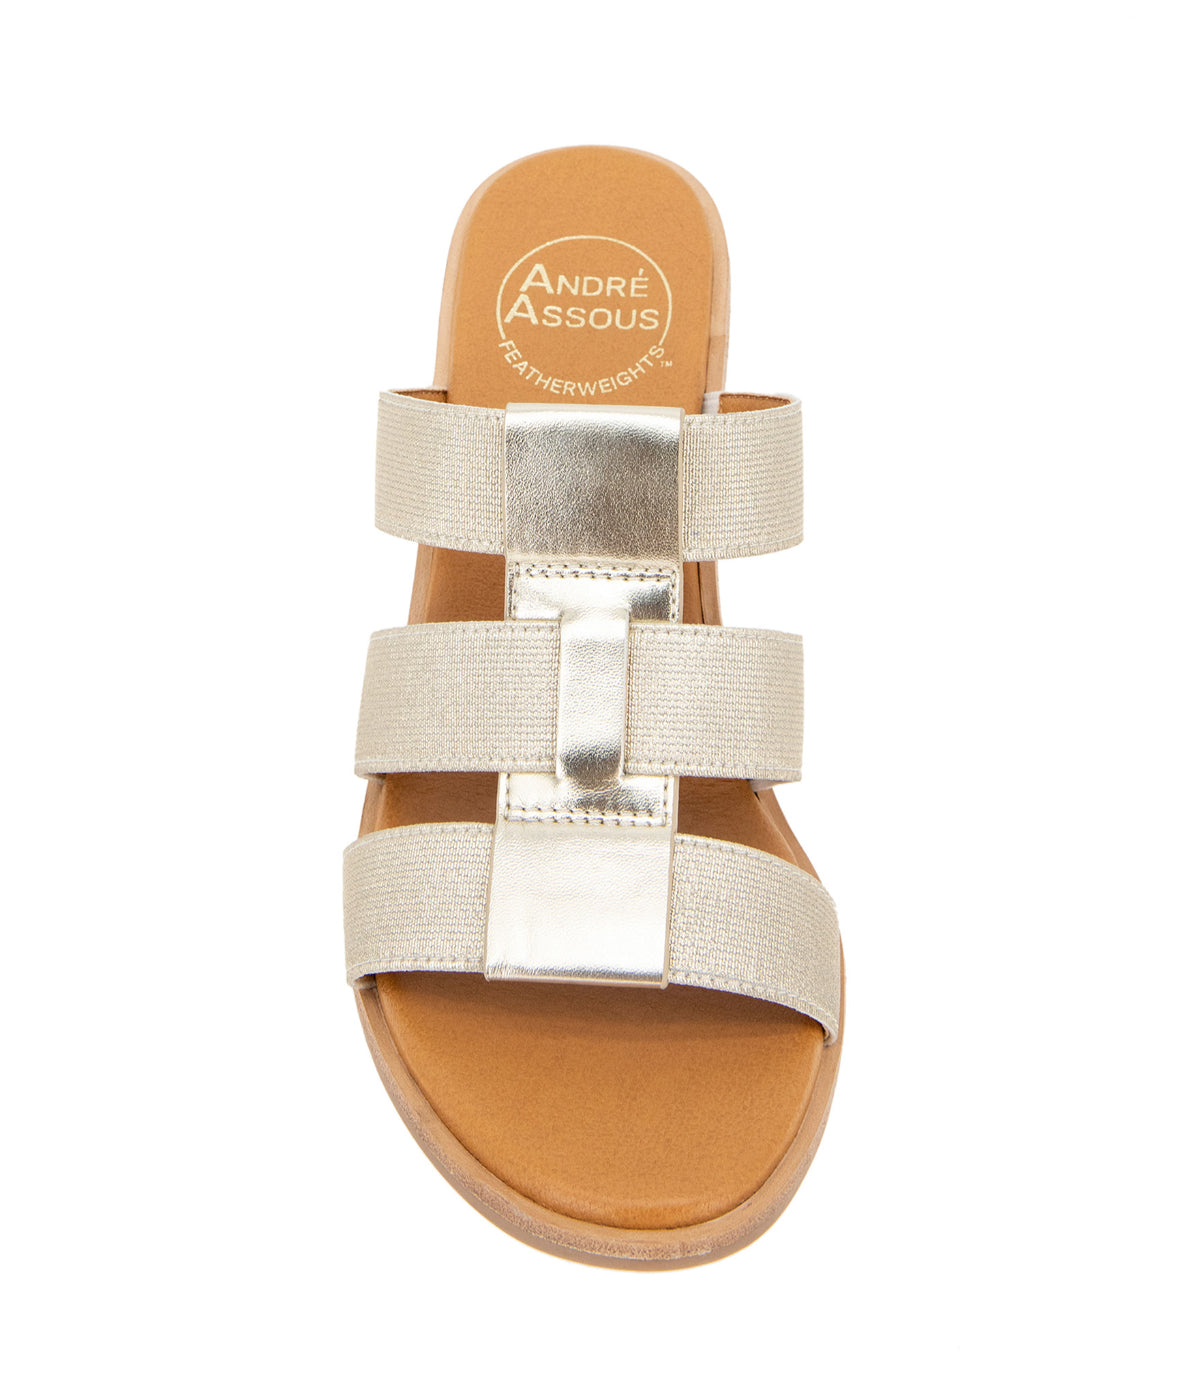 Featherweight Wedge Sandal